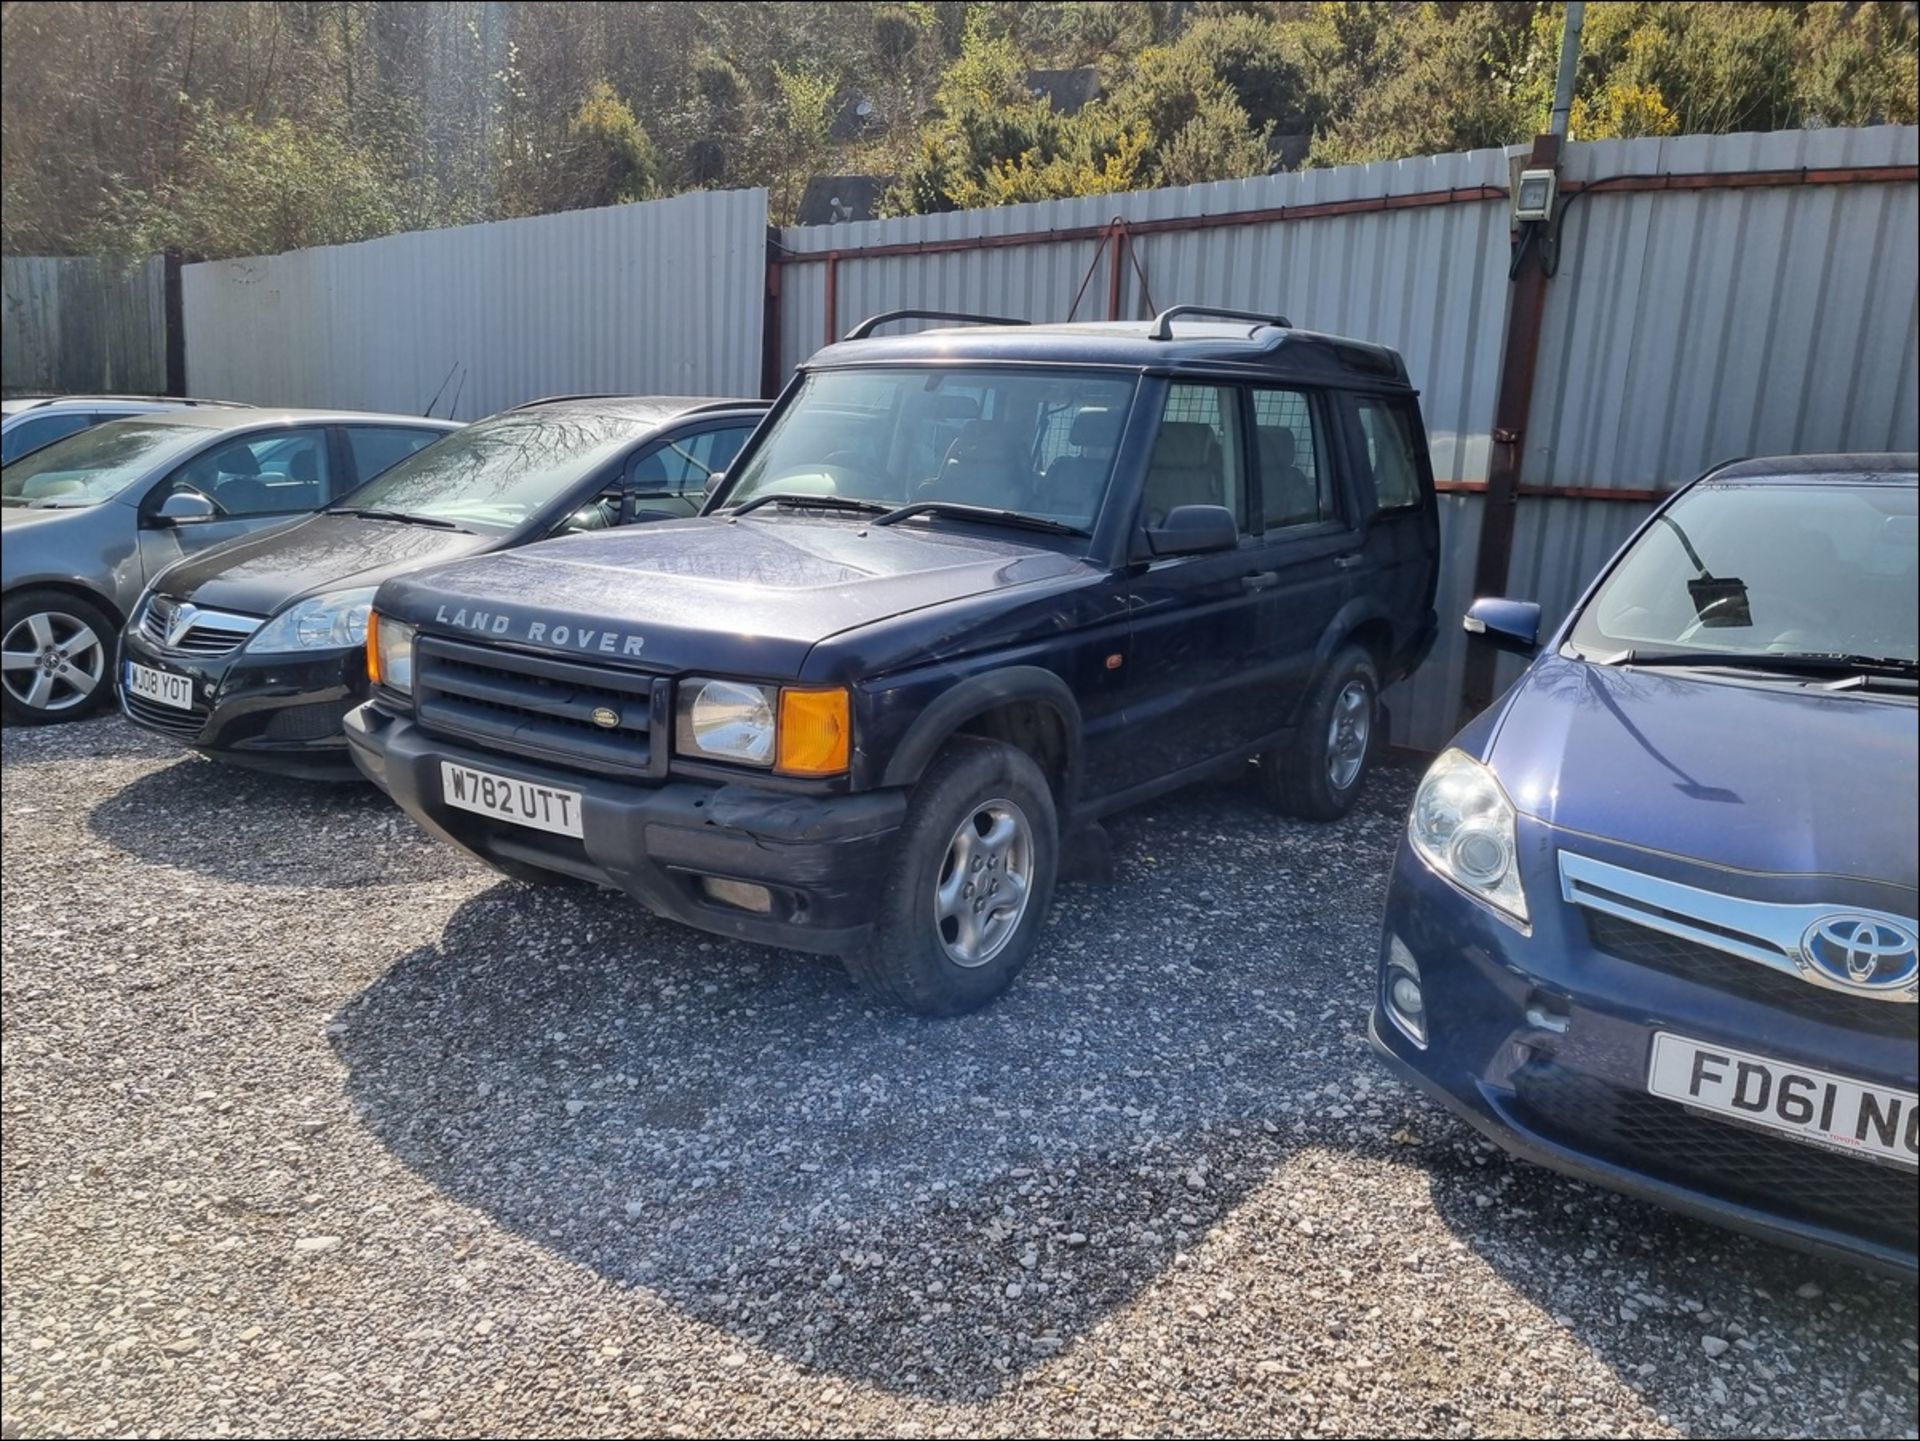 2000 LAND ROVER DISCOVERY - 2500cc 5dr Estate (Blue) - Image 8 of 23